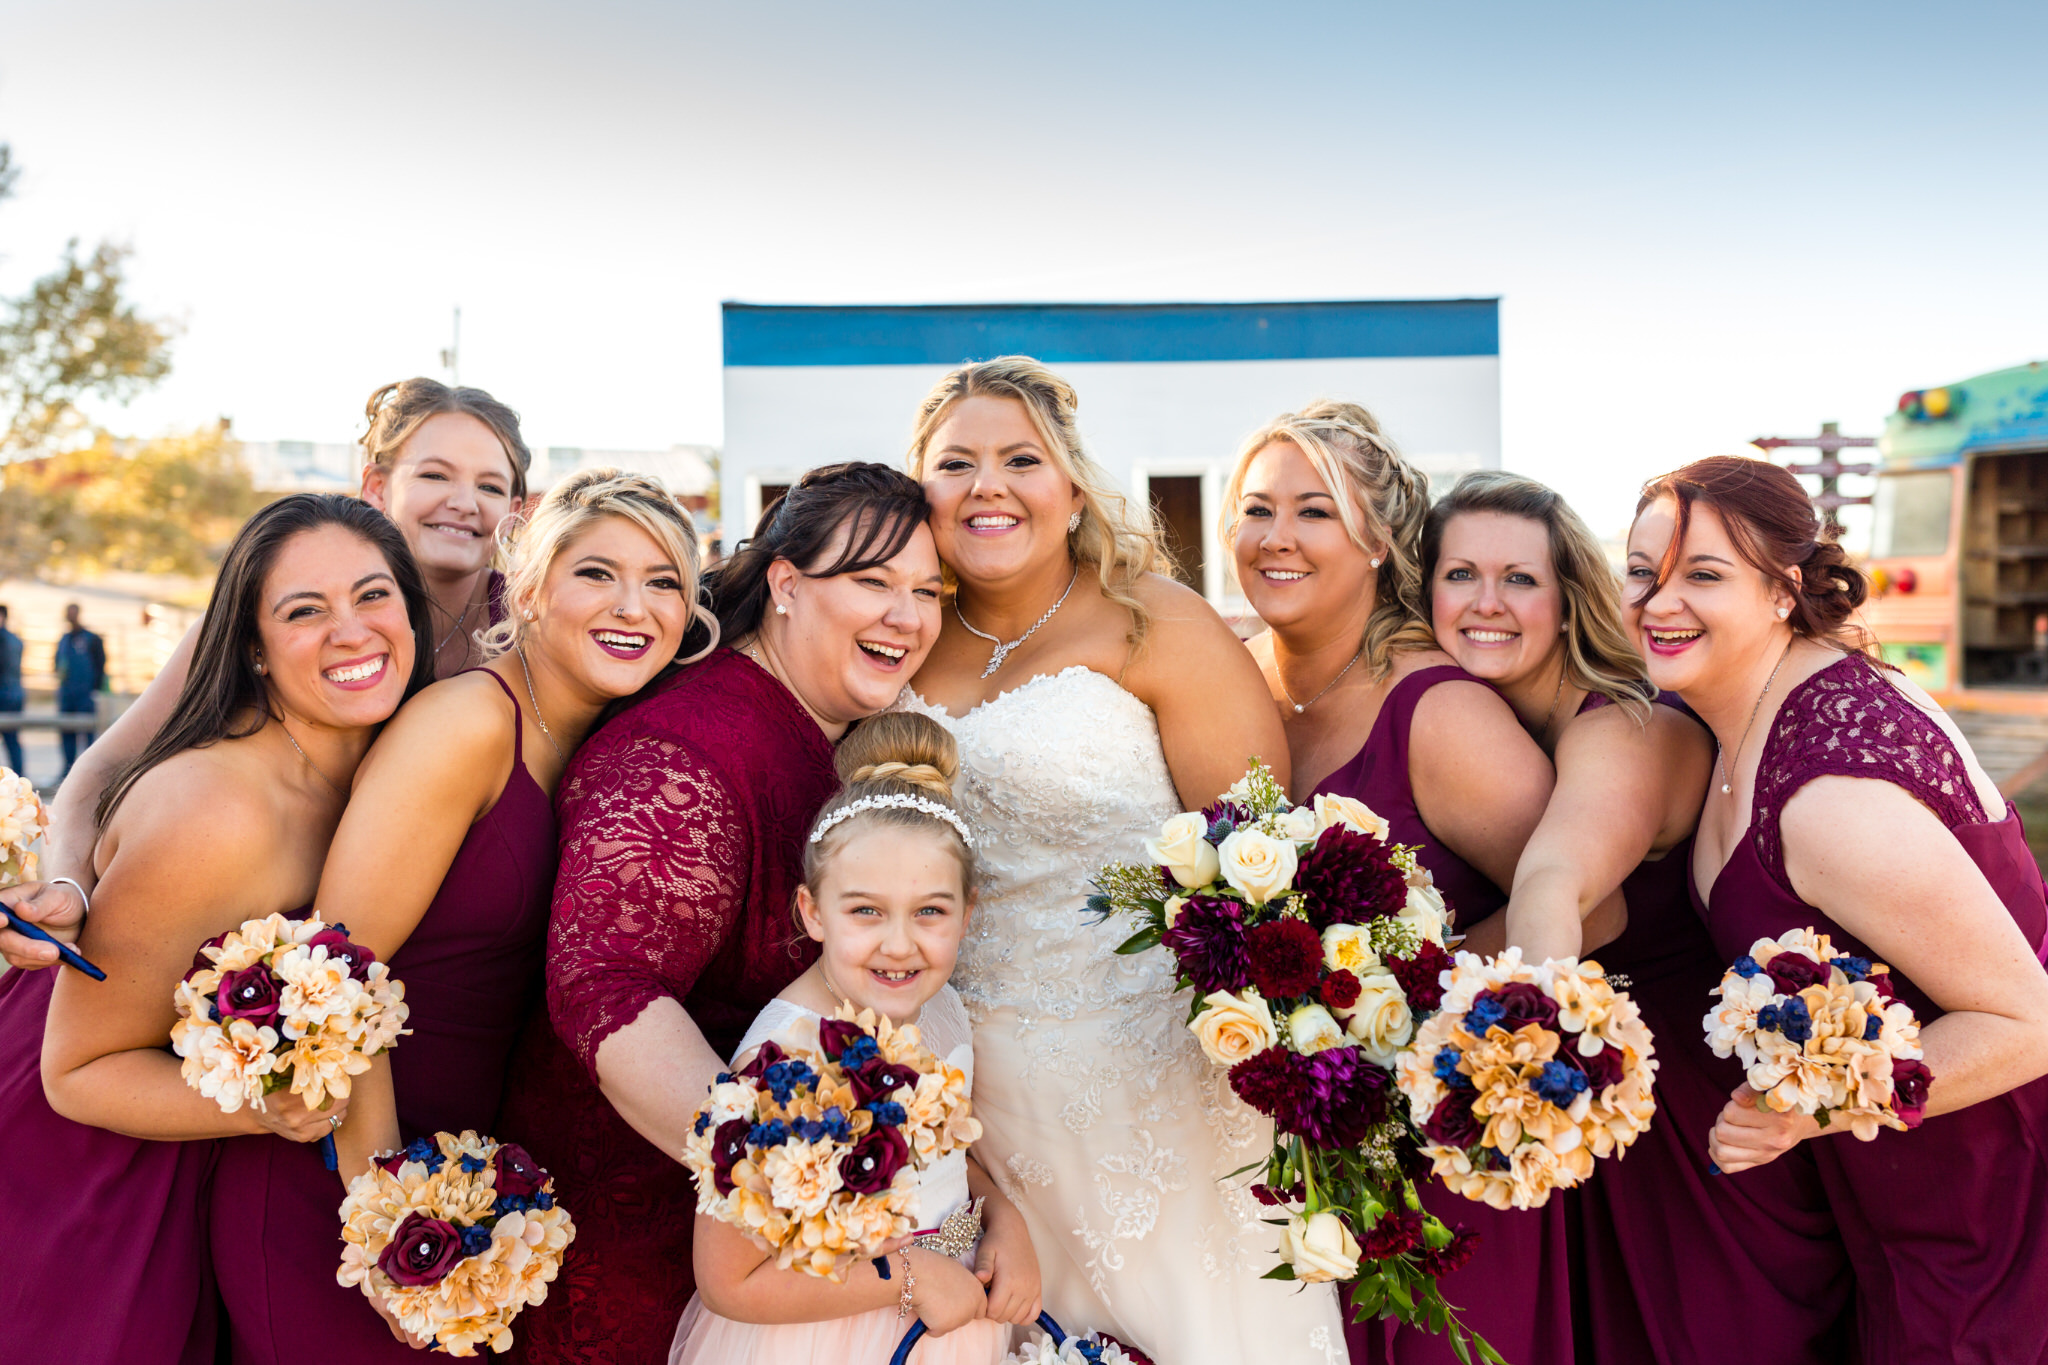 The bridesmaids hugging the bride. Briana and Kevin's Terry Bison Ranch Wedding by Wyoming Wedding Photographer Jennifer Garza, Wyoming Wedding, Wyoming Wedding Photographer, Wyoming Engagement Photographer, Wyoming Bride, Couples Goals, Wyoming Wedding, Wedding Photographer, Wyoming Photographer, Wyoming Wedding Photography, Wedding Inspiration, Destination Wedding Photographer, Fall Wedding, Ranch Wedding, Rustic Wedding Inspiration, Wedding Dress Inspo